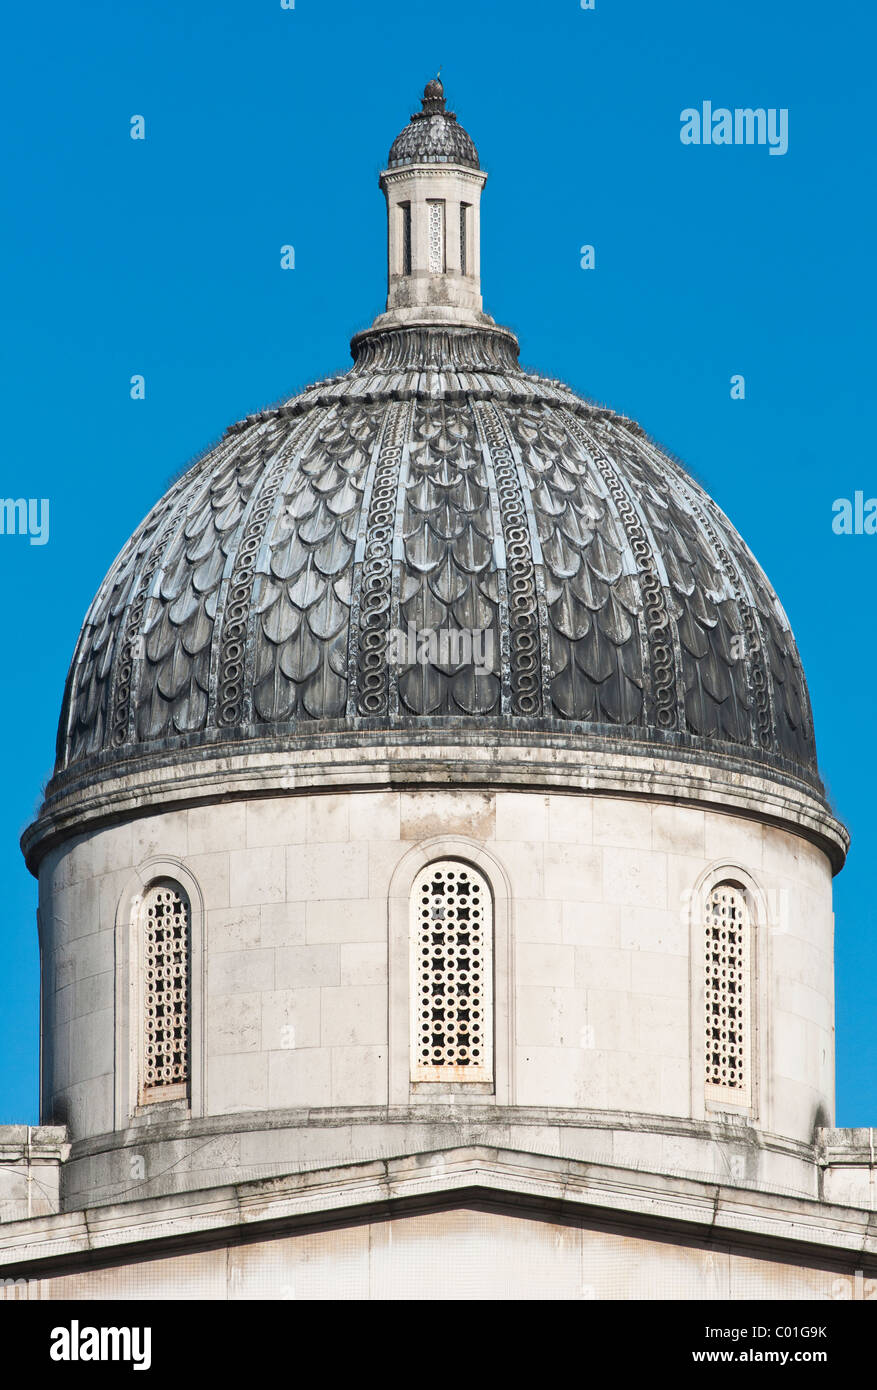 National Gallery Cupola, London Stock Photo